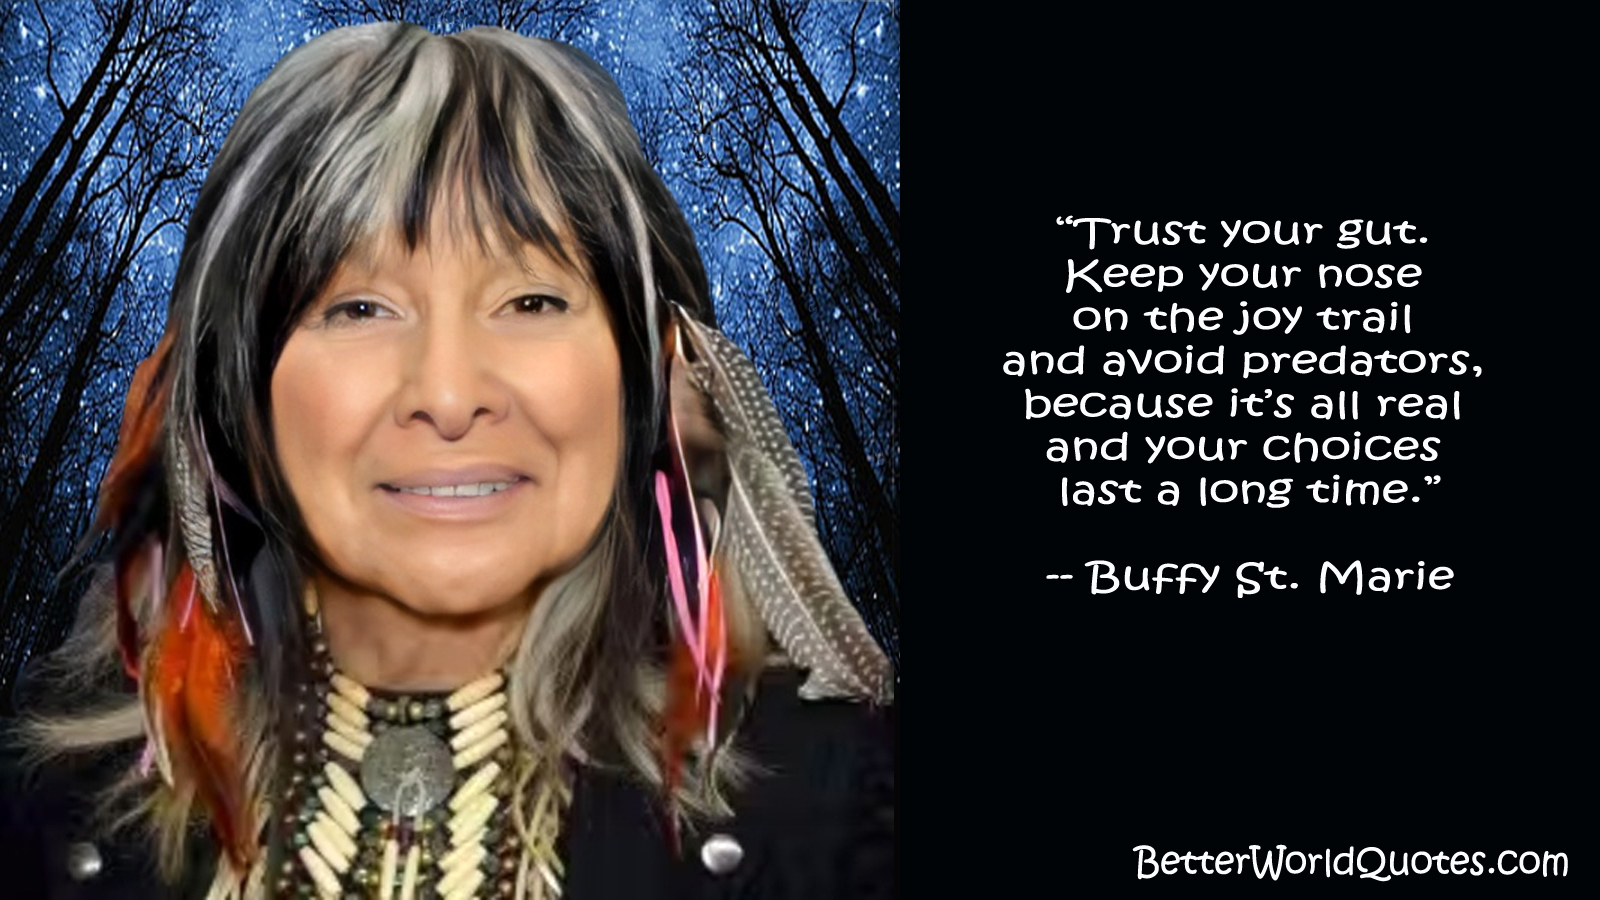 Buffy Sainte-Marie: Trust your gut. Keep your nose on the joy trail and avoid predators, because its all real and your choices last a long time.